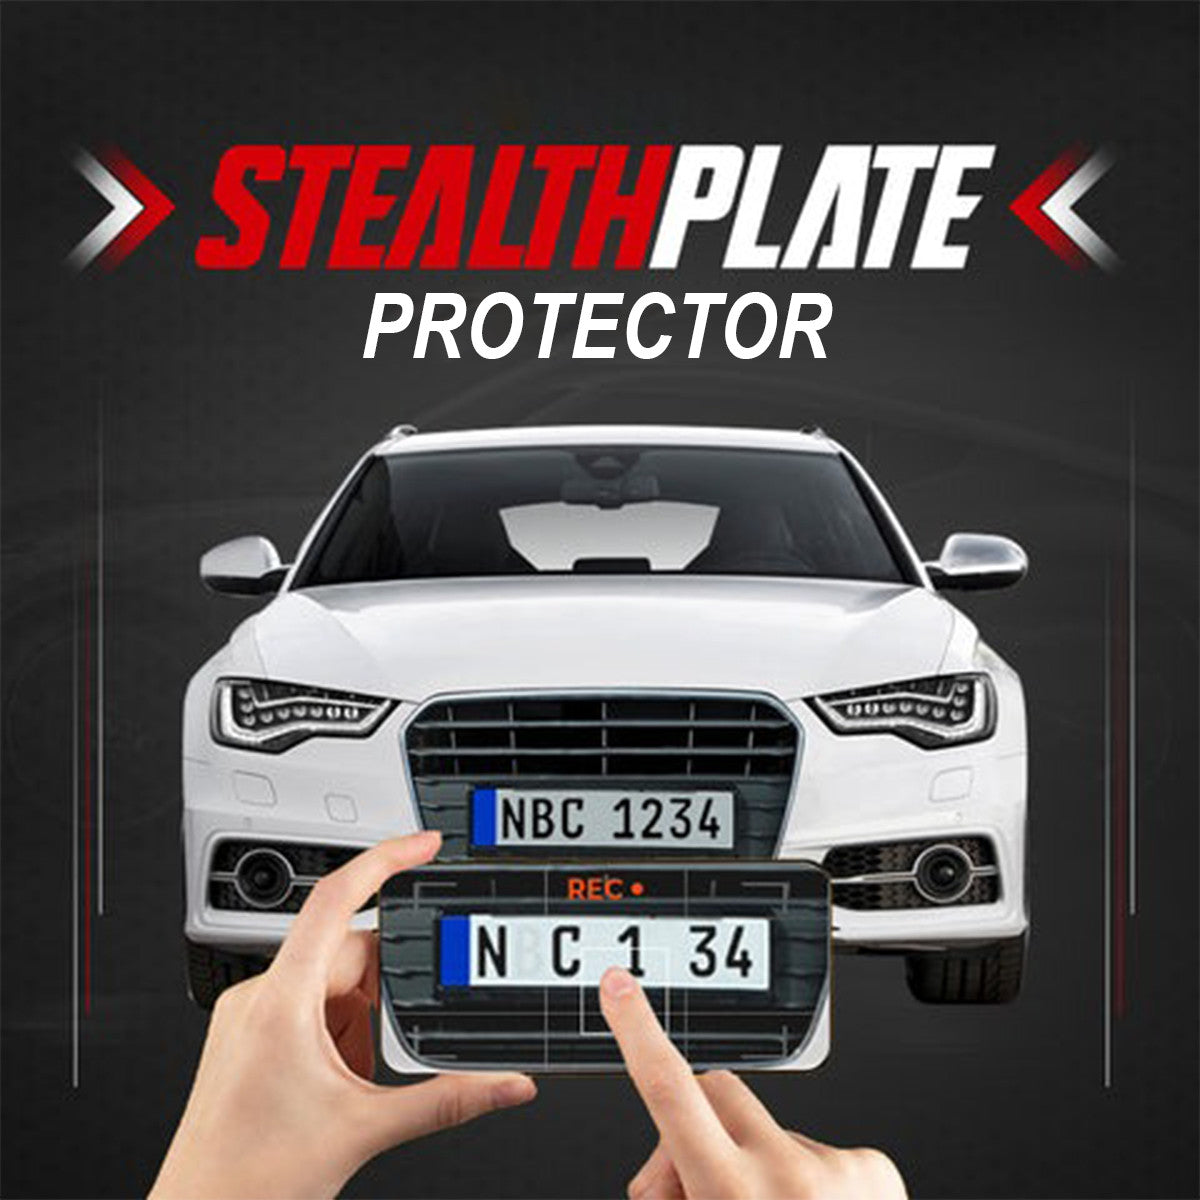 StealthPlate Protector